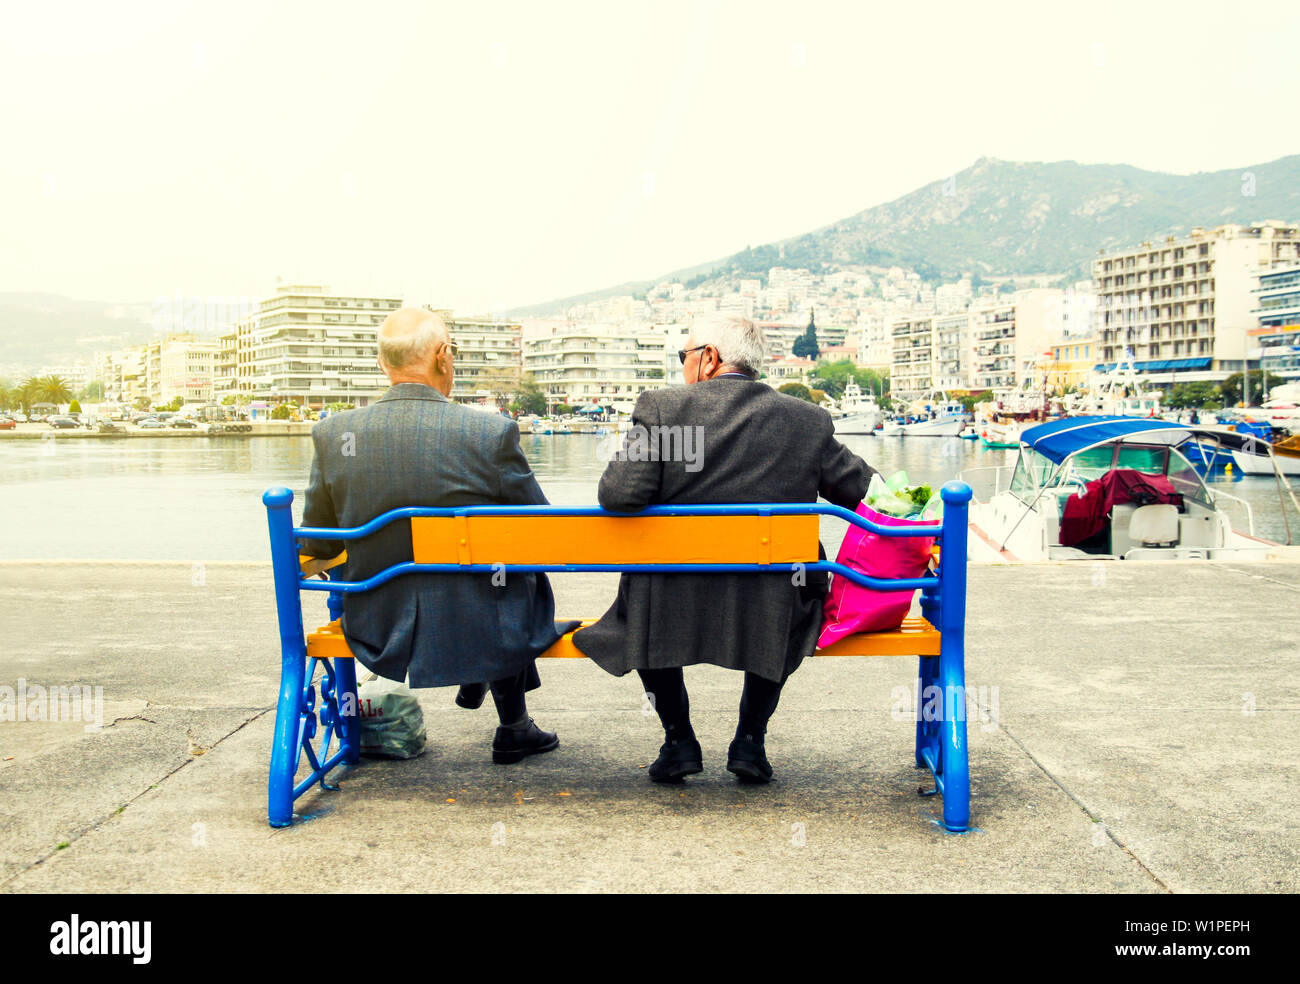 Two senior men sitting on a bench and watching the sea view Stock Photo